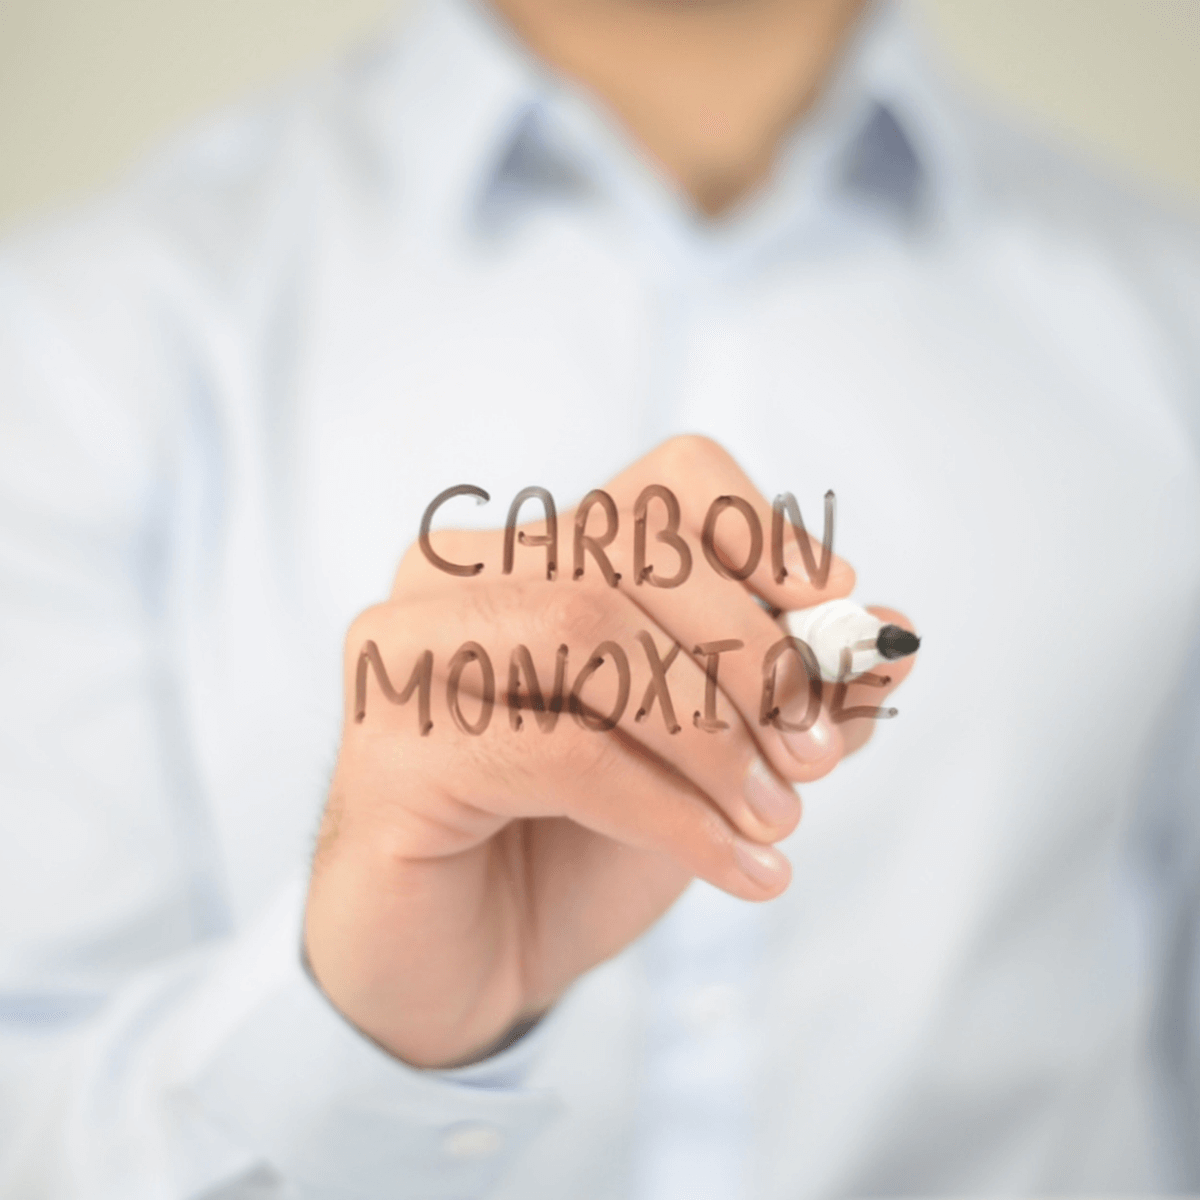 Test for carbon monoxide in your home